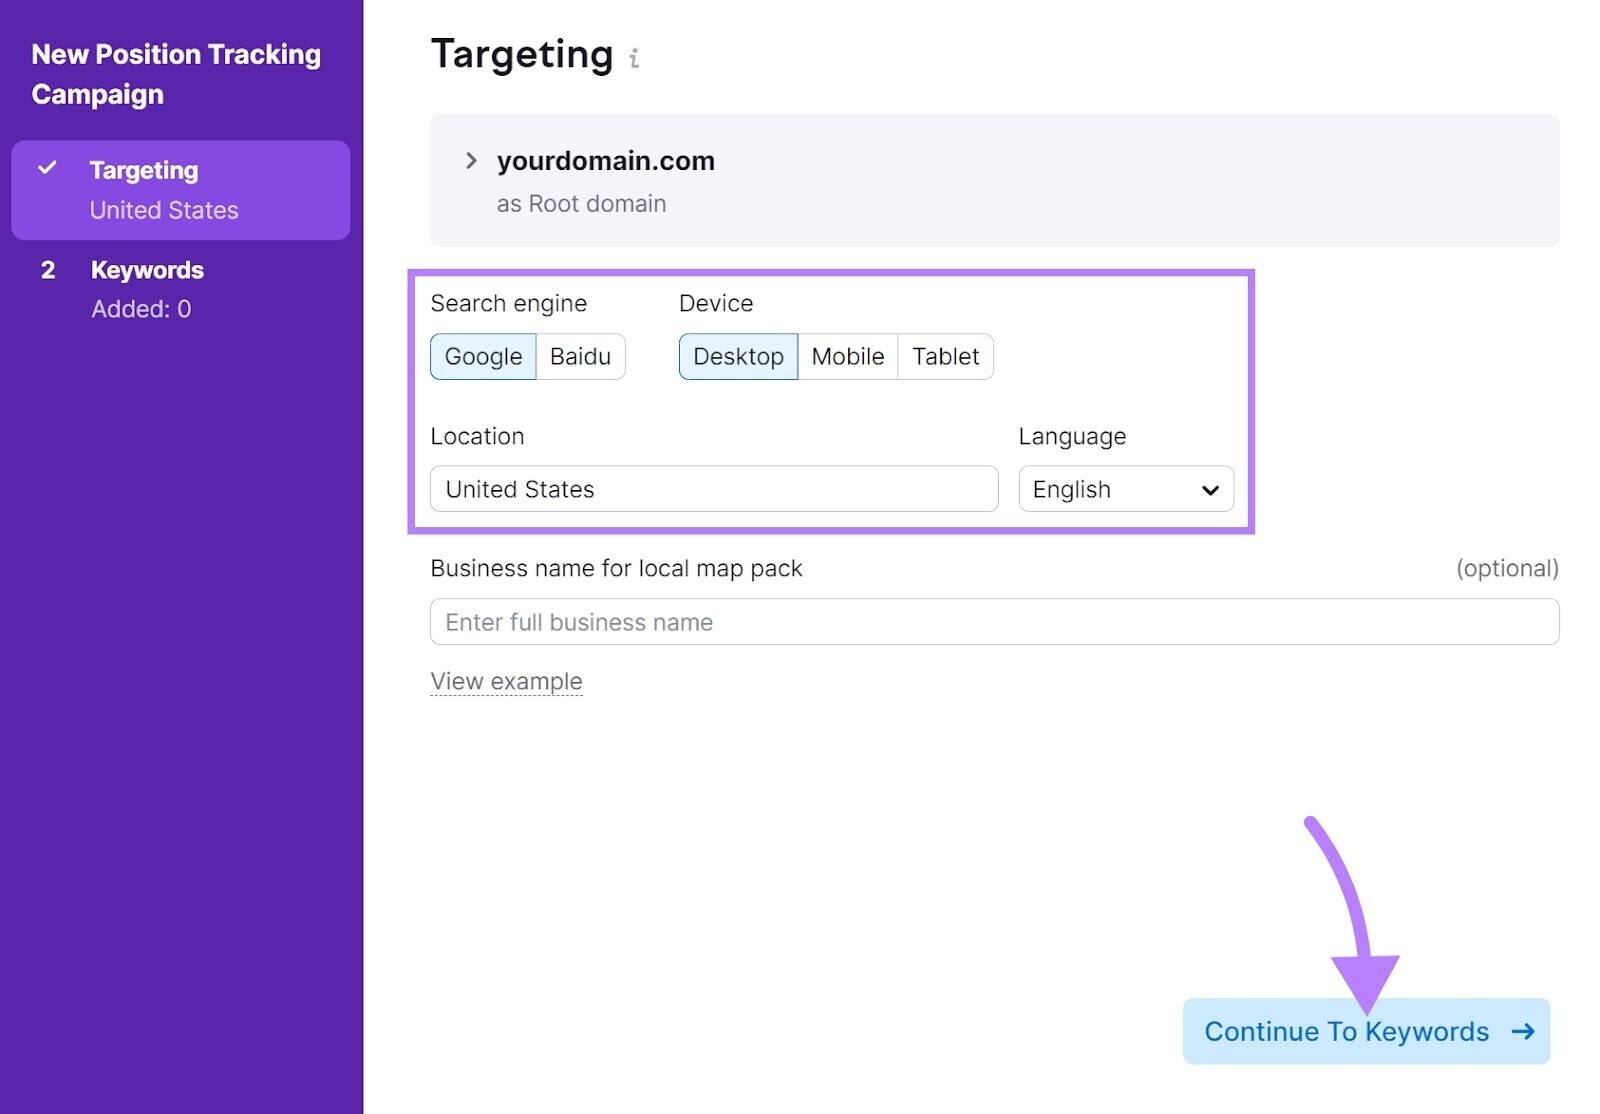 "Targeting" window in Position Tracking configuration steps